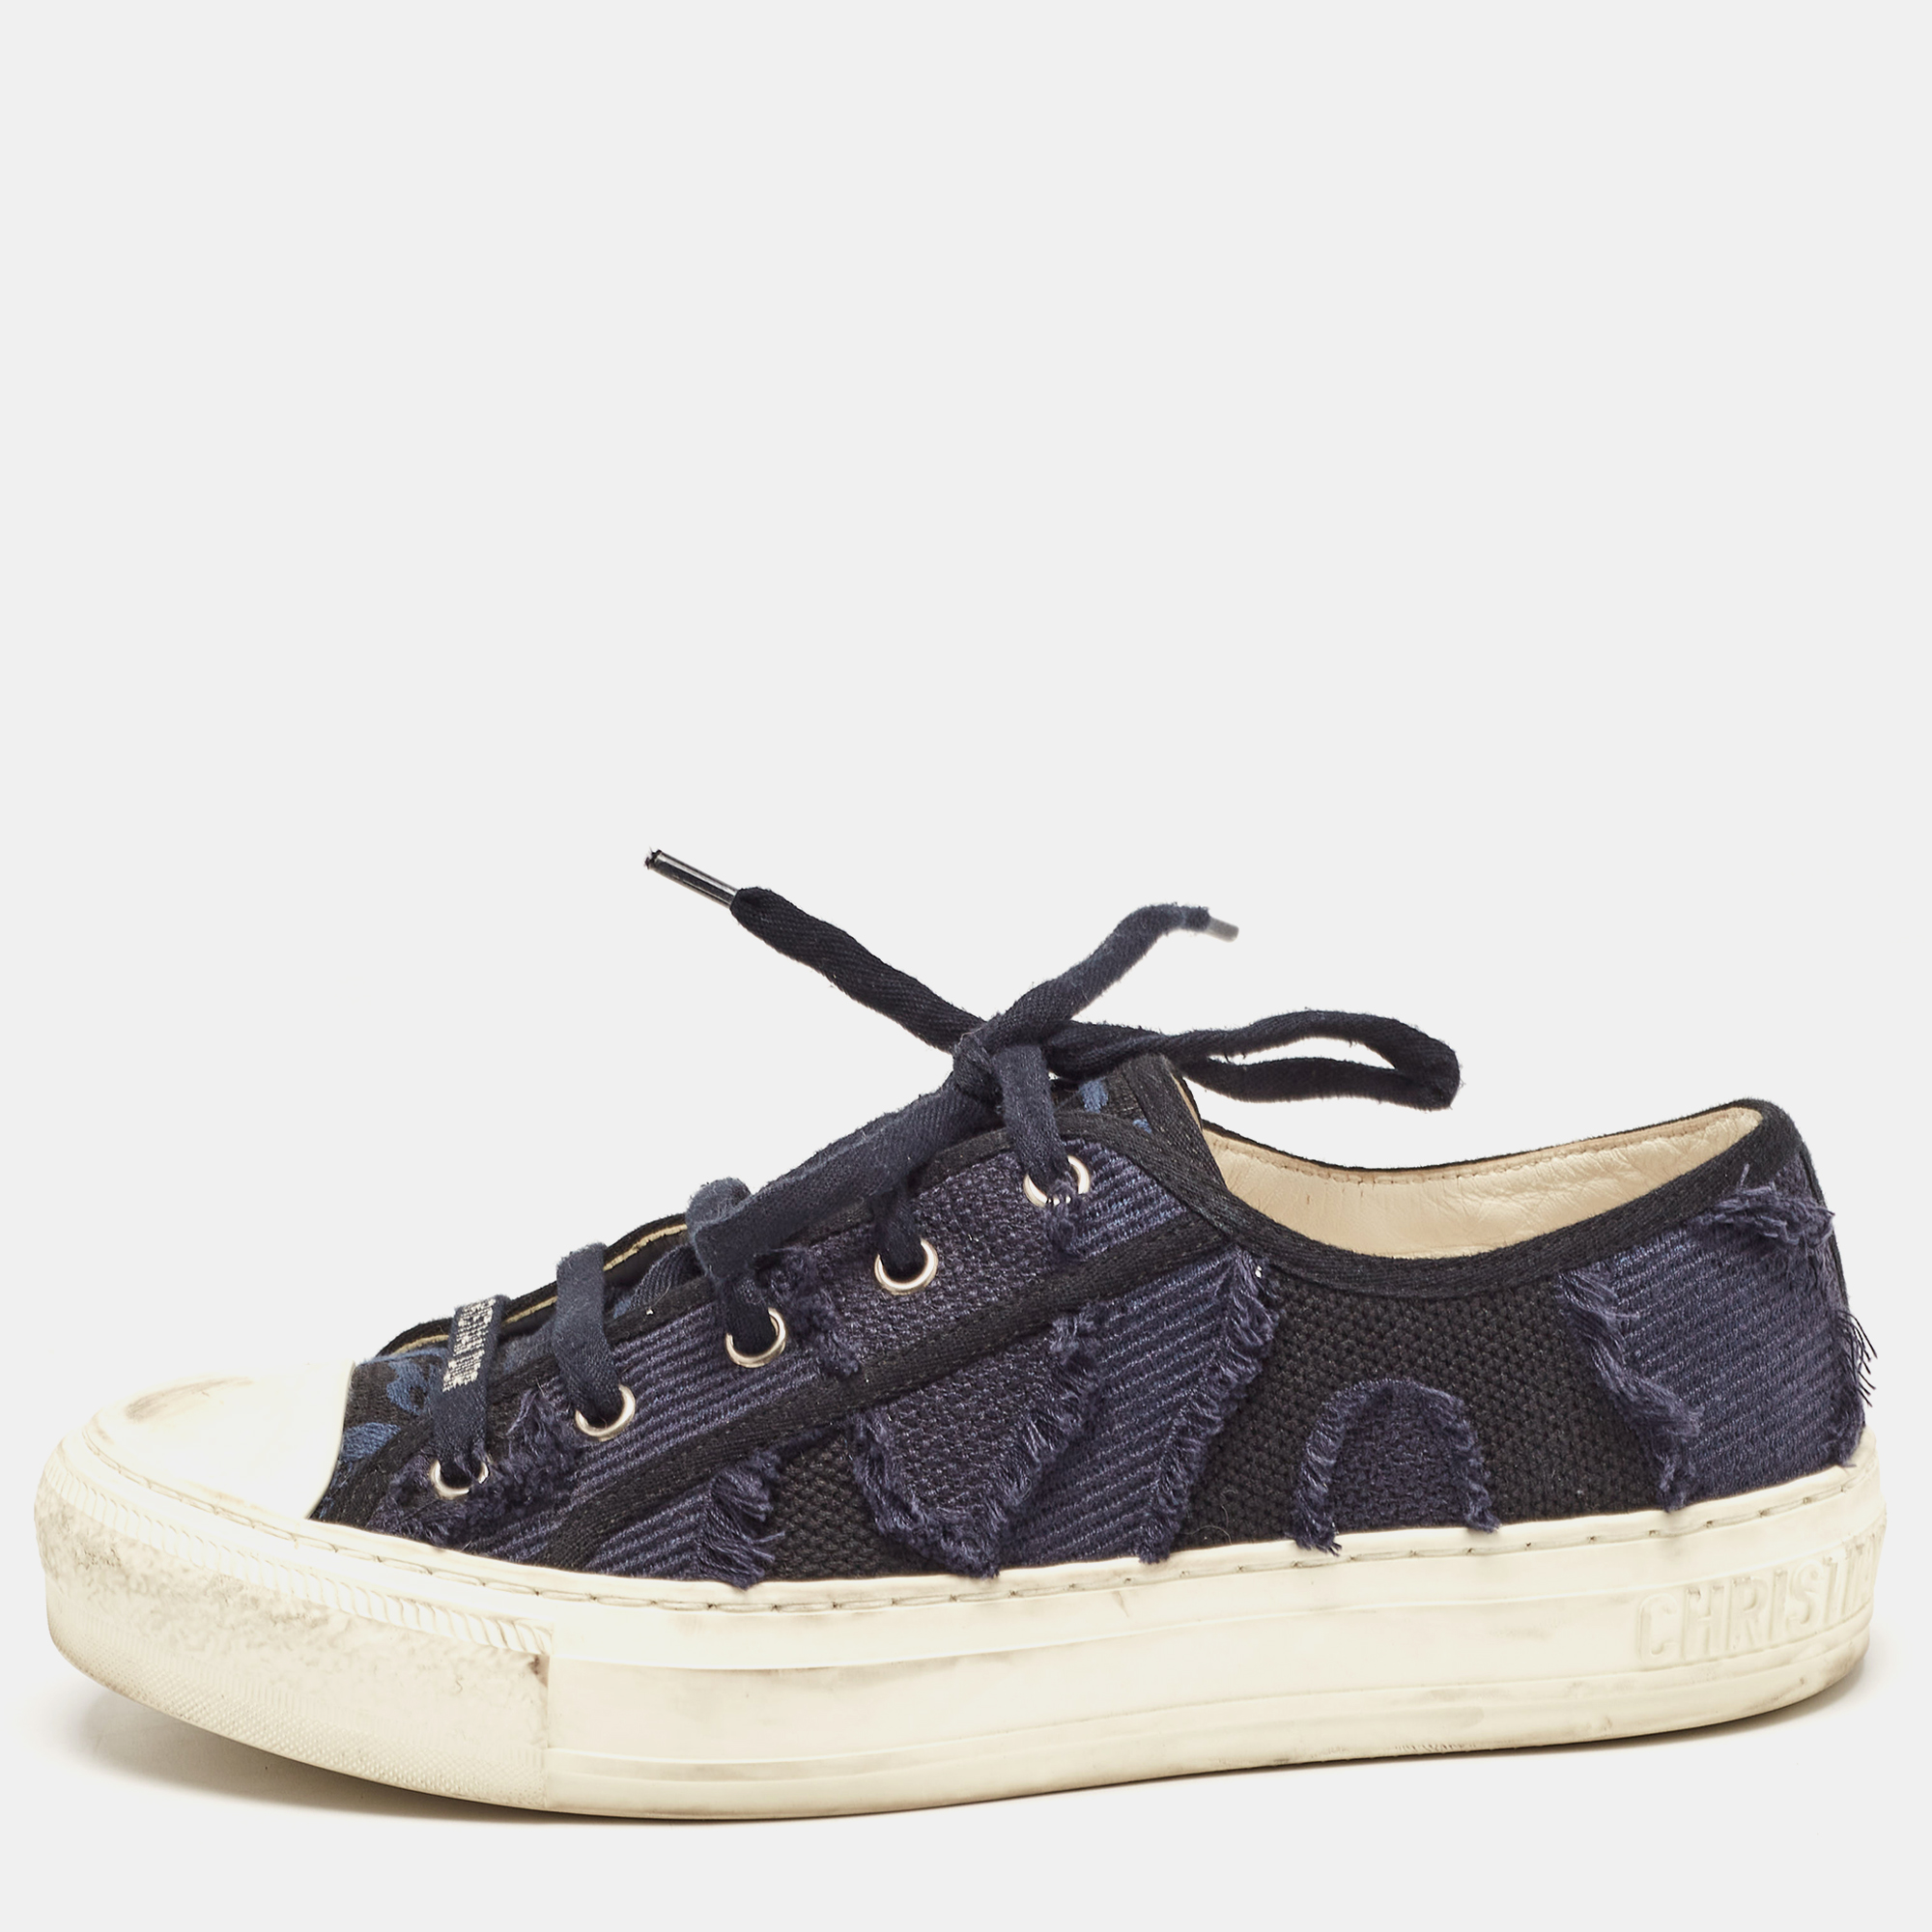 Dior Navy Blue Canvas Walk'N'Dior Low Top Sneakers Size 38.5